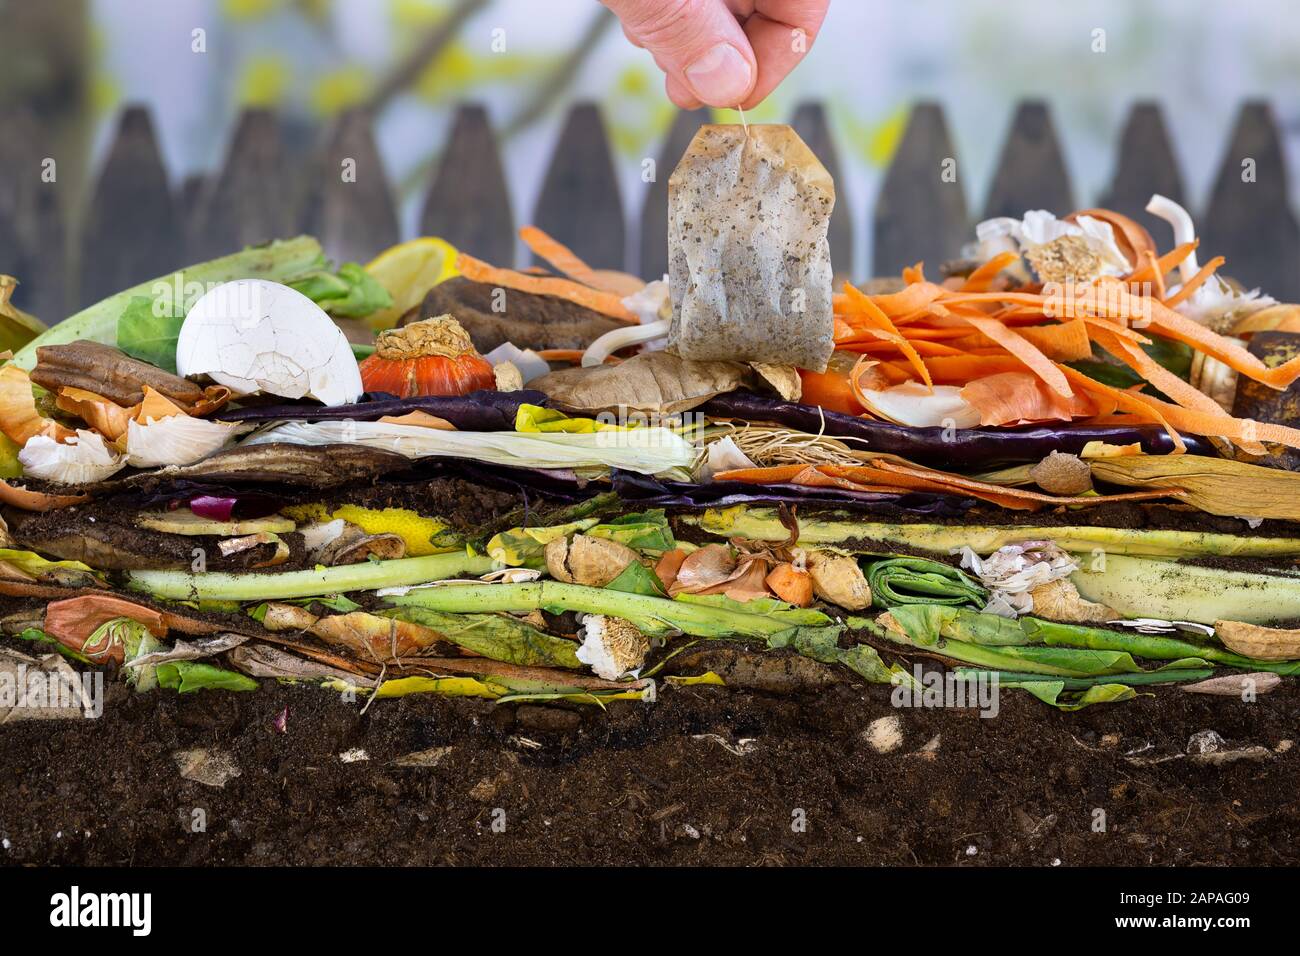 Male hand adding a biodegradable teabag to a colorful compost heap consisting of rotting kitchen leftovers Stock Photo